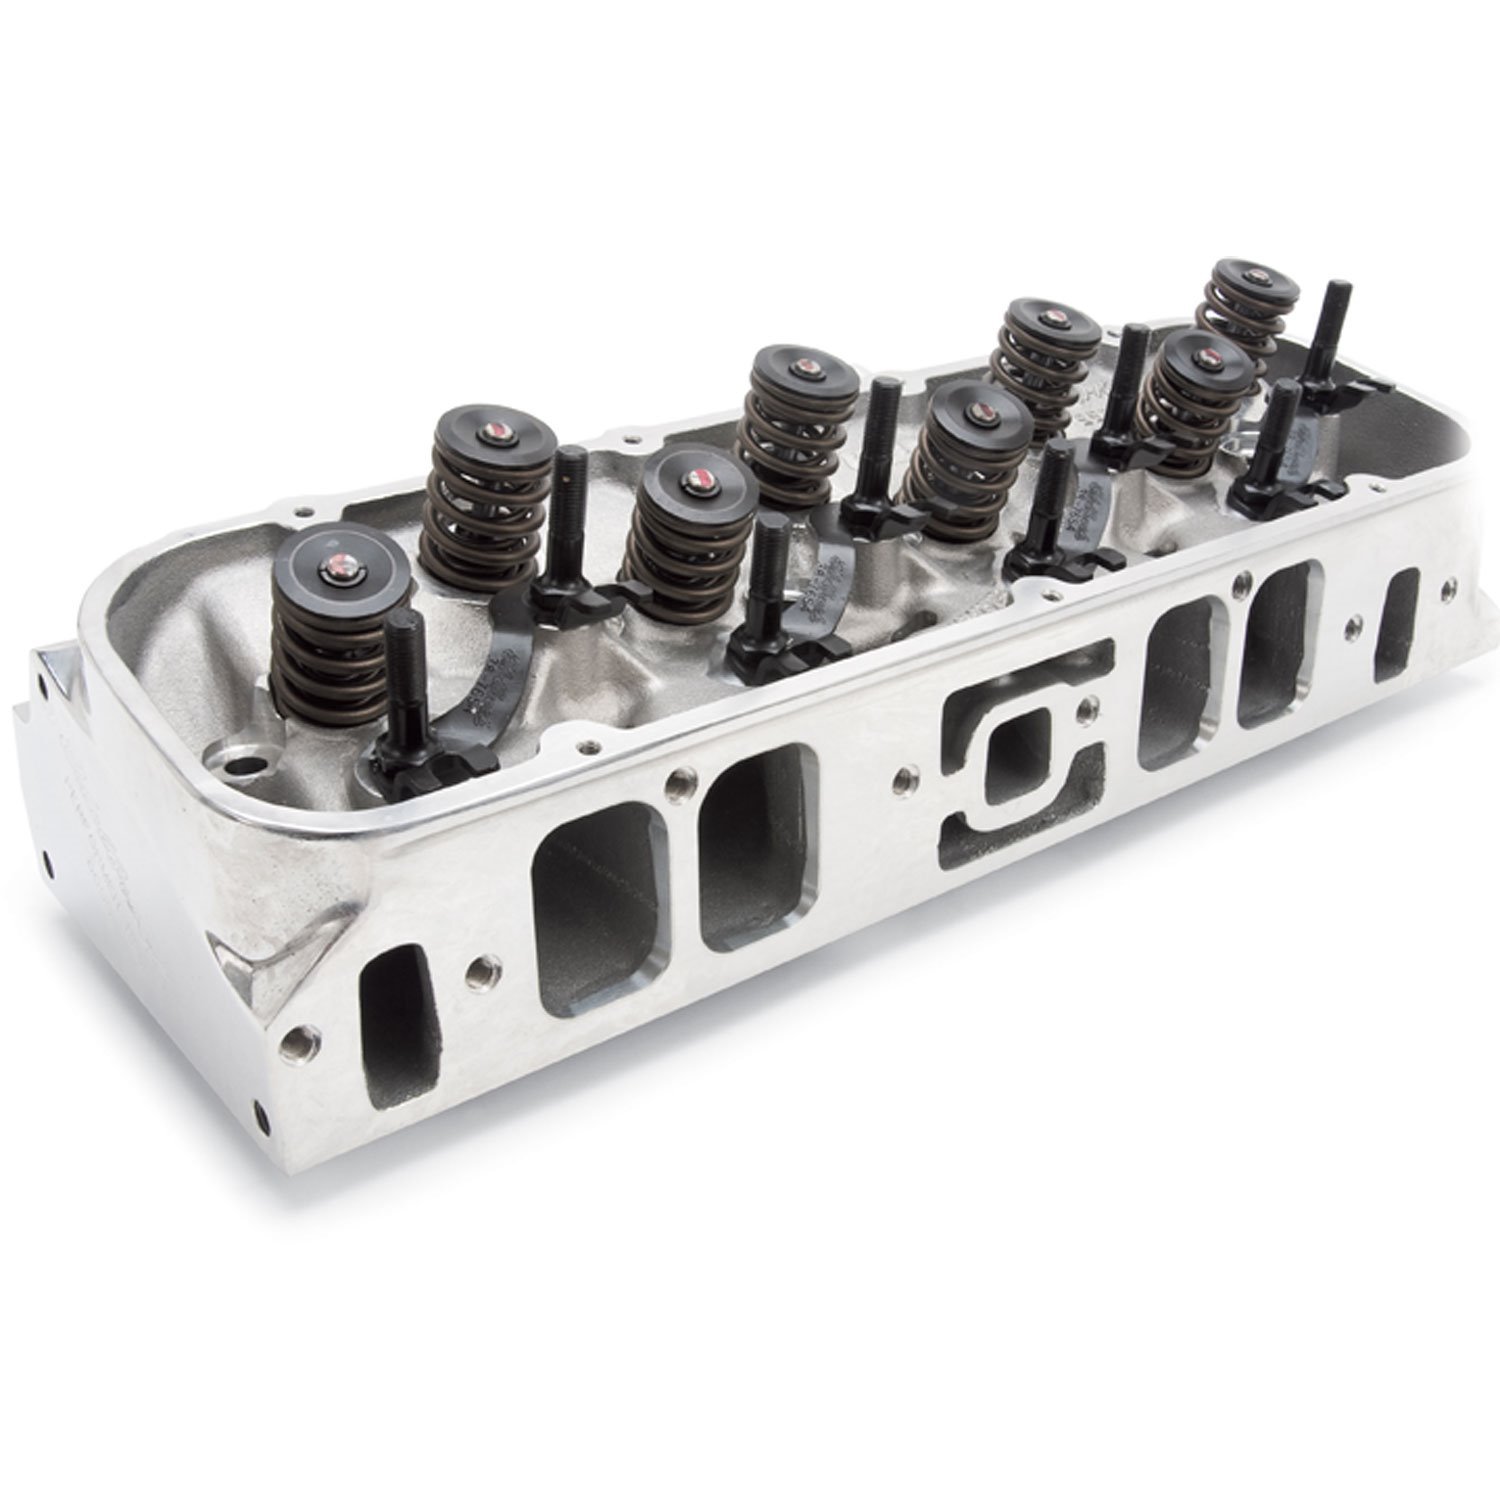 Performer RPM454-R Rectangle Port Aluminum Cylinder Head for Big Block Chevy